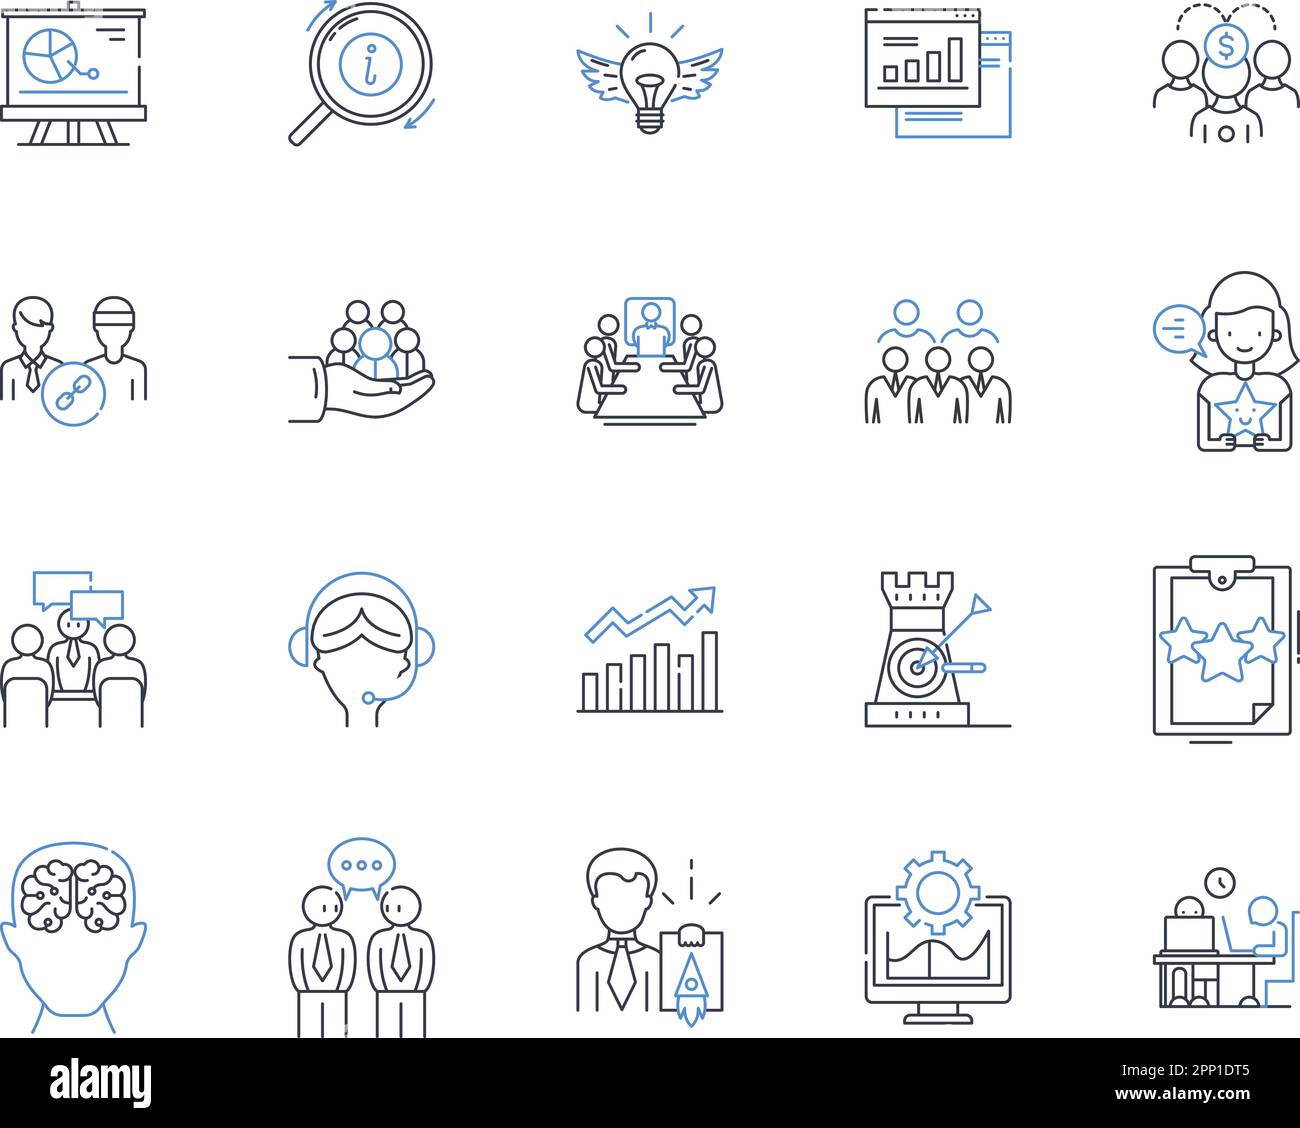 Group worker line icons collection. Facilitator, Leader, Communicator, Organizer, Collaborator, Motivator, Supporter vector and linear illustration Stock Vector